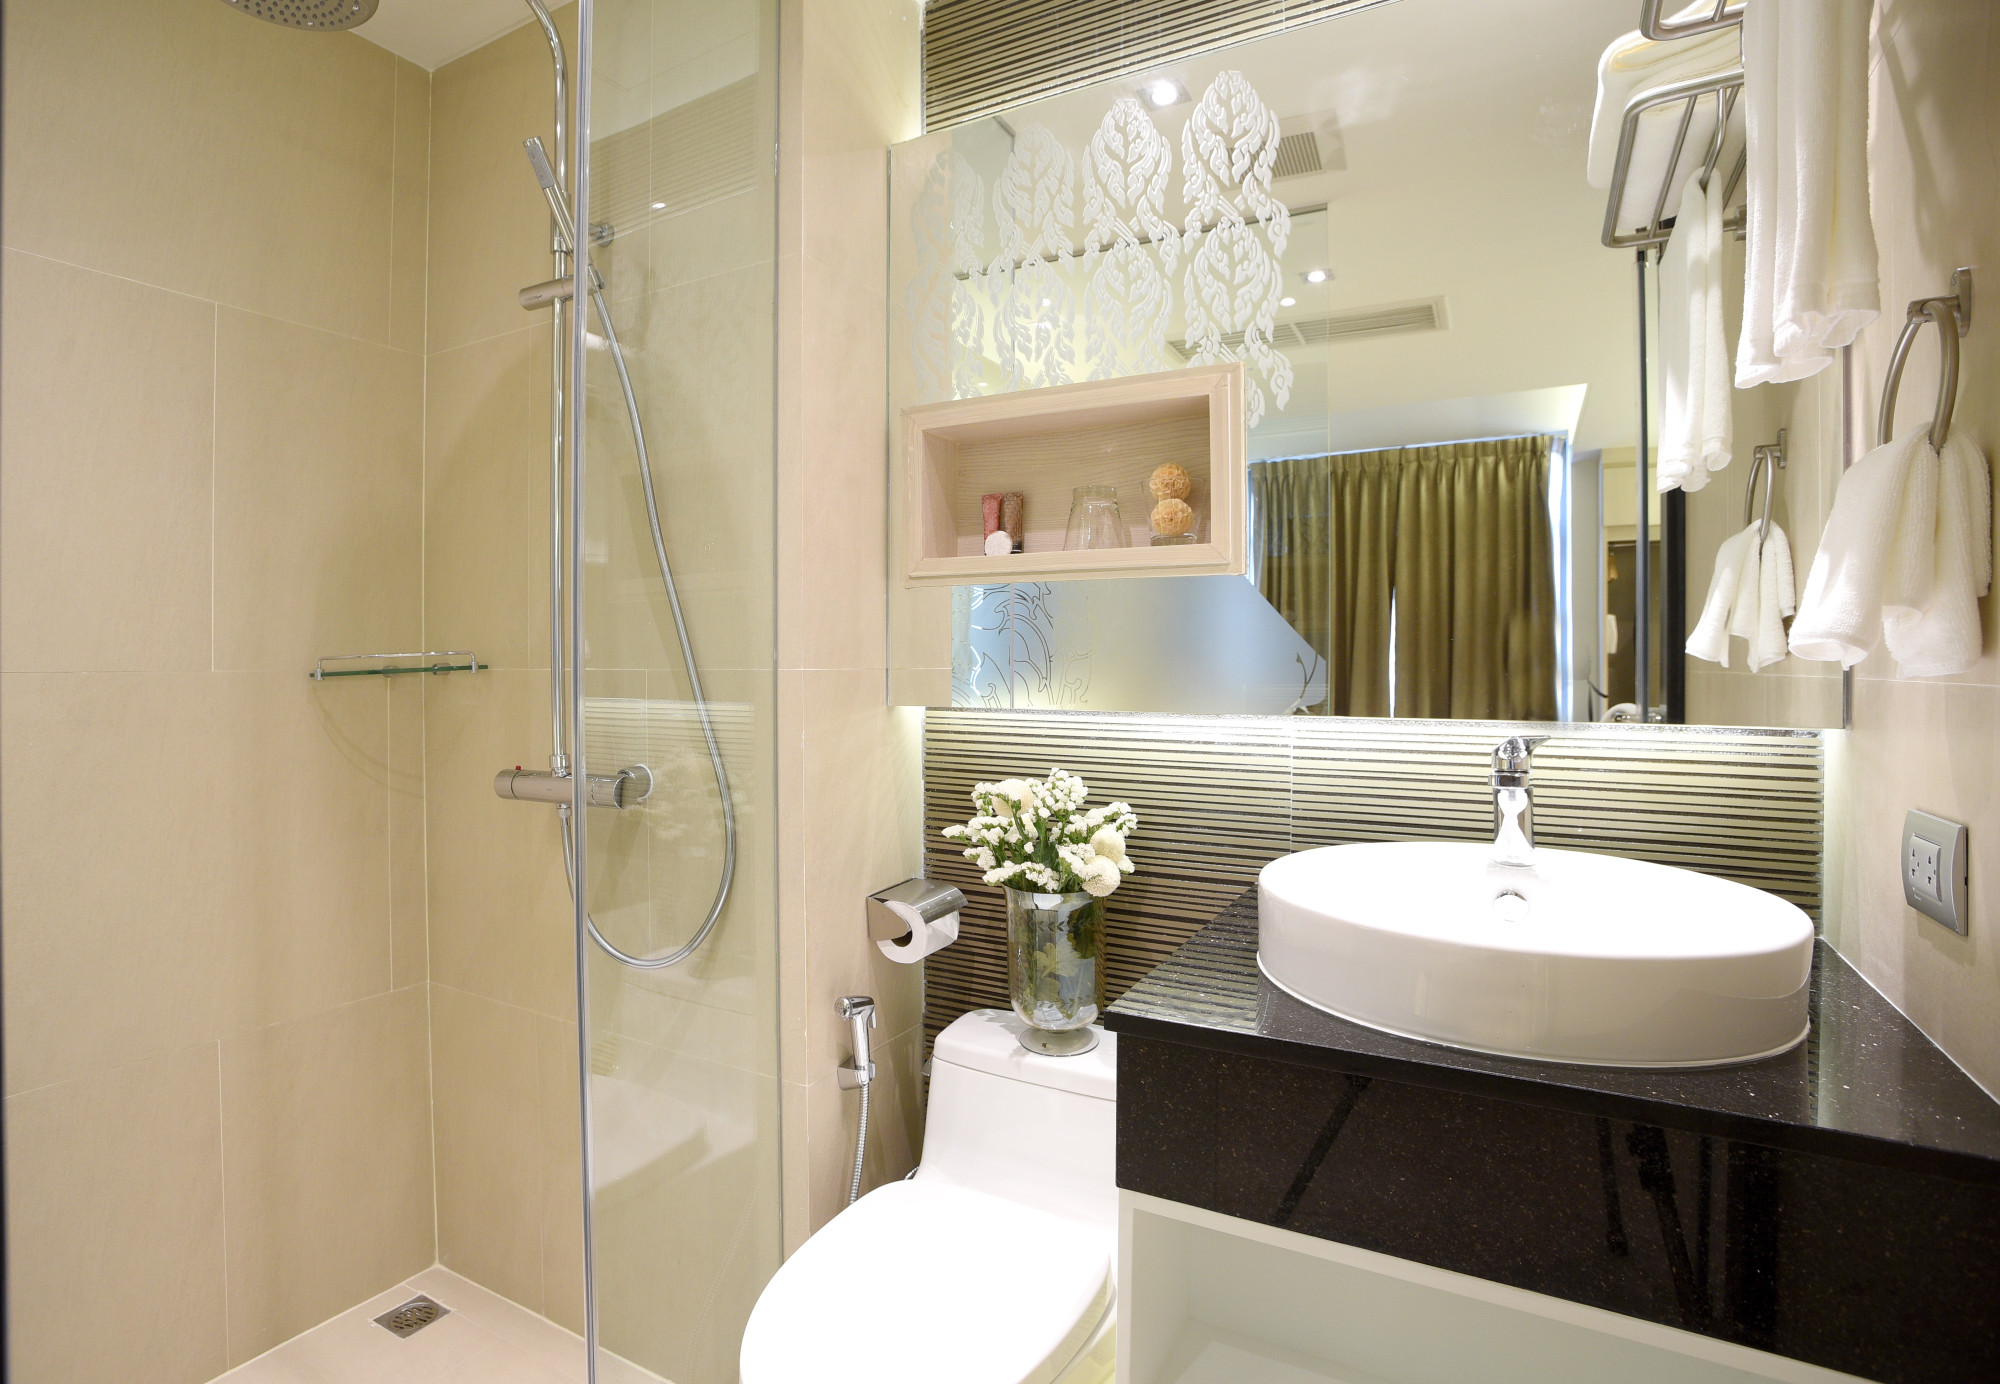 There are a few things you can do to make your small bathroom feel more spacious and comfortable. Here’s a quick look at the best options.